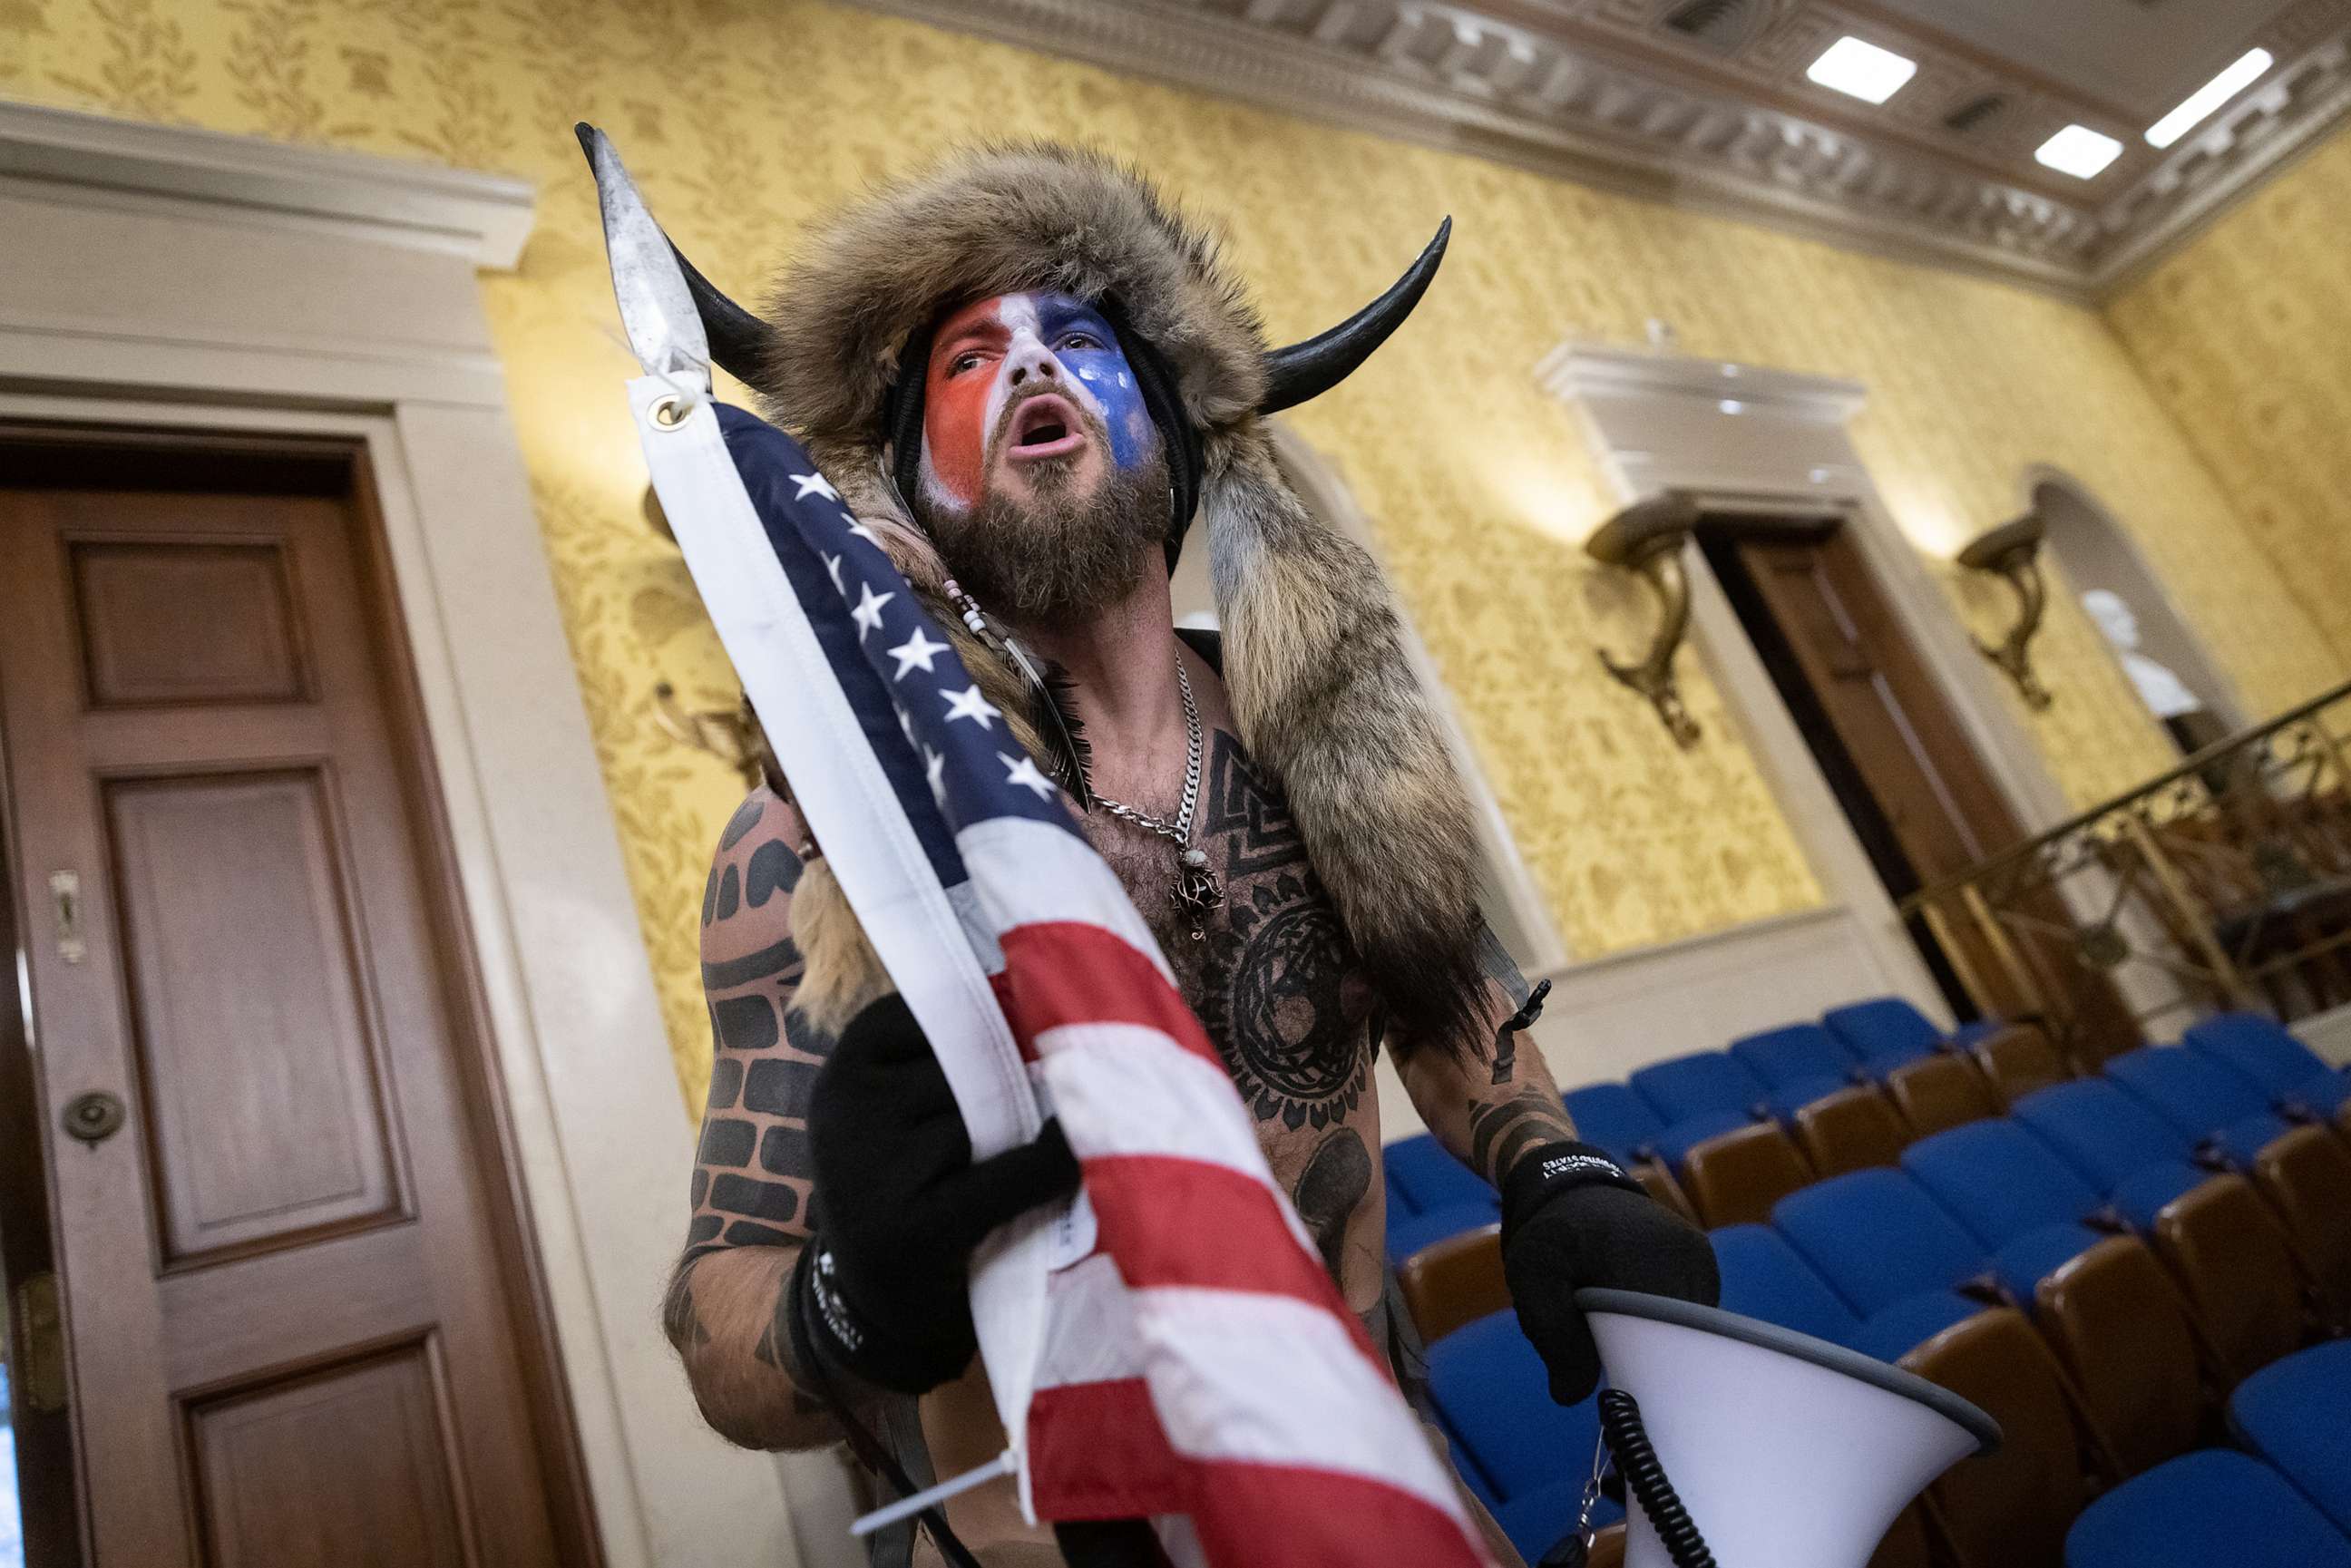 PHOTO: Jacob Chansley, also known as the "QAnon Shaman," screams "Freedom" inside the U.S. Senate chamber after the Capitol was breached by a mob during a joint session of Congress, Jan. 6, 2021.